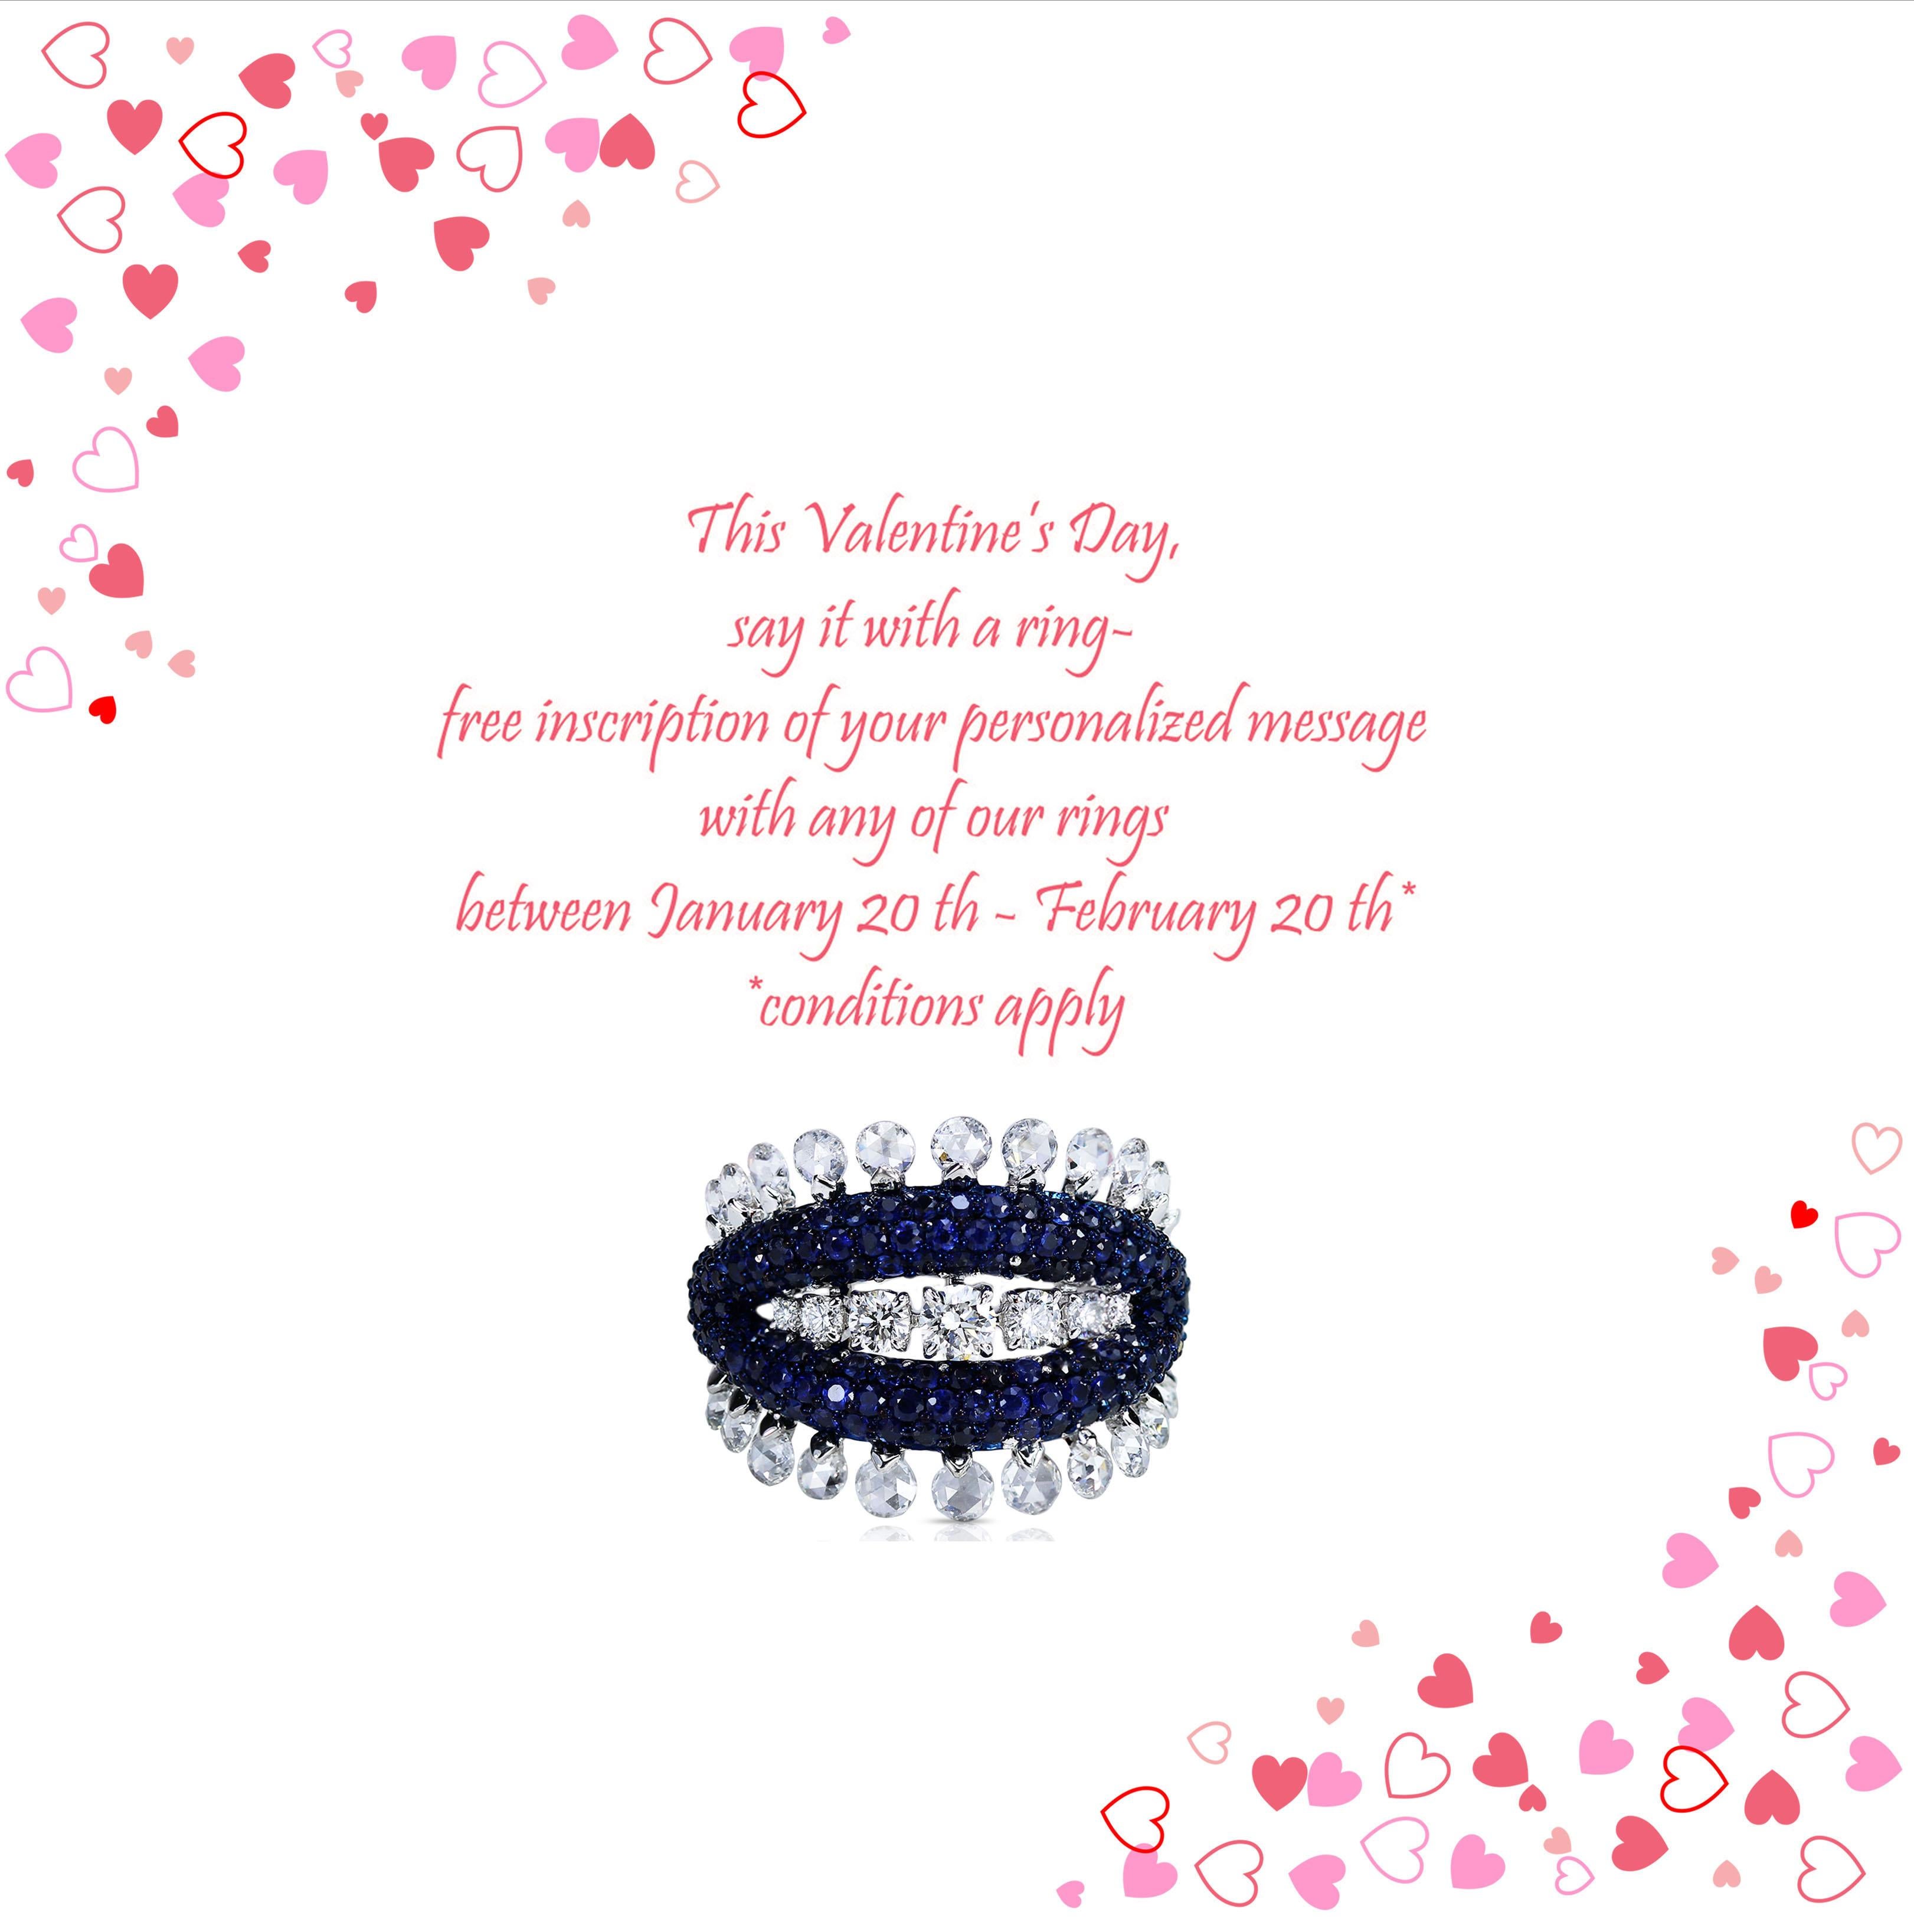 This Valentine’s Day, say it with a ring- free inscription of your personalized message with any of our rings between January 20 th - February 20 th* 

F-G/ VVS-VS-SI Diamond and Blue Sapphire Ring

Combining the enduring sparkle of diamonds with